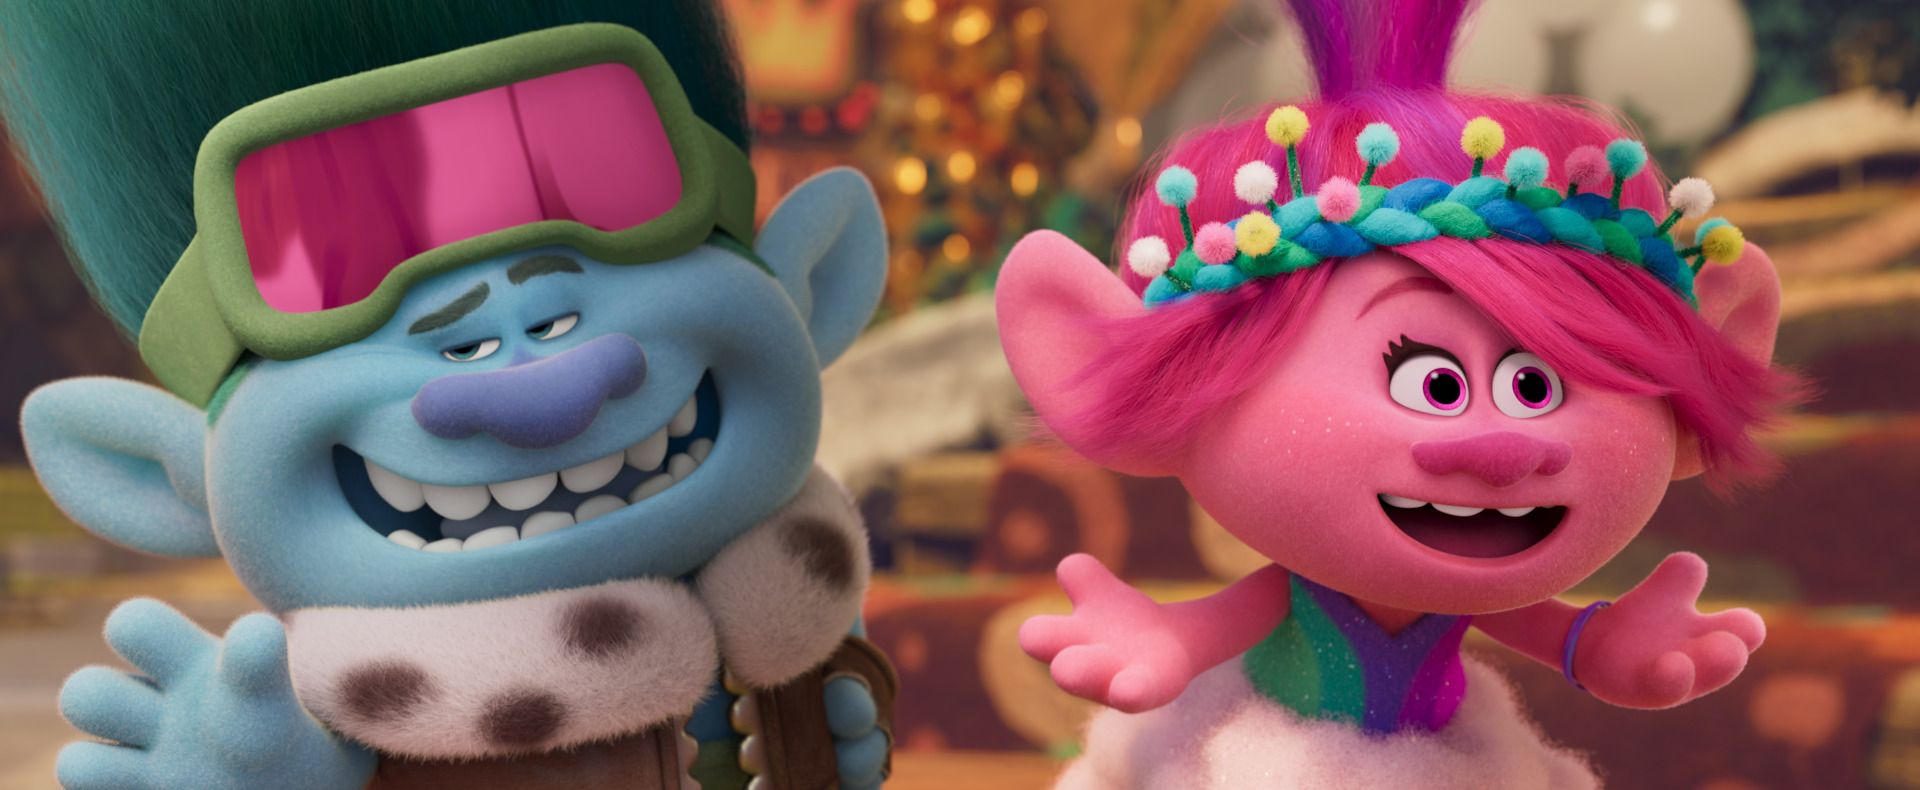 'Trolls Band Together' Poster Introduces the New Trolls On the Block